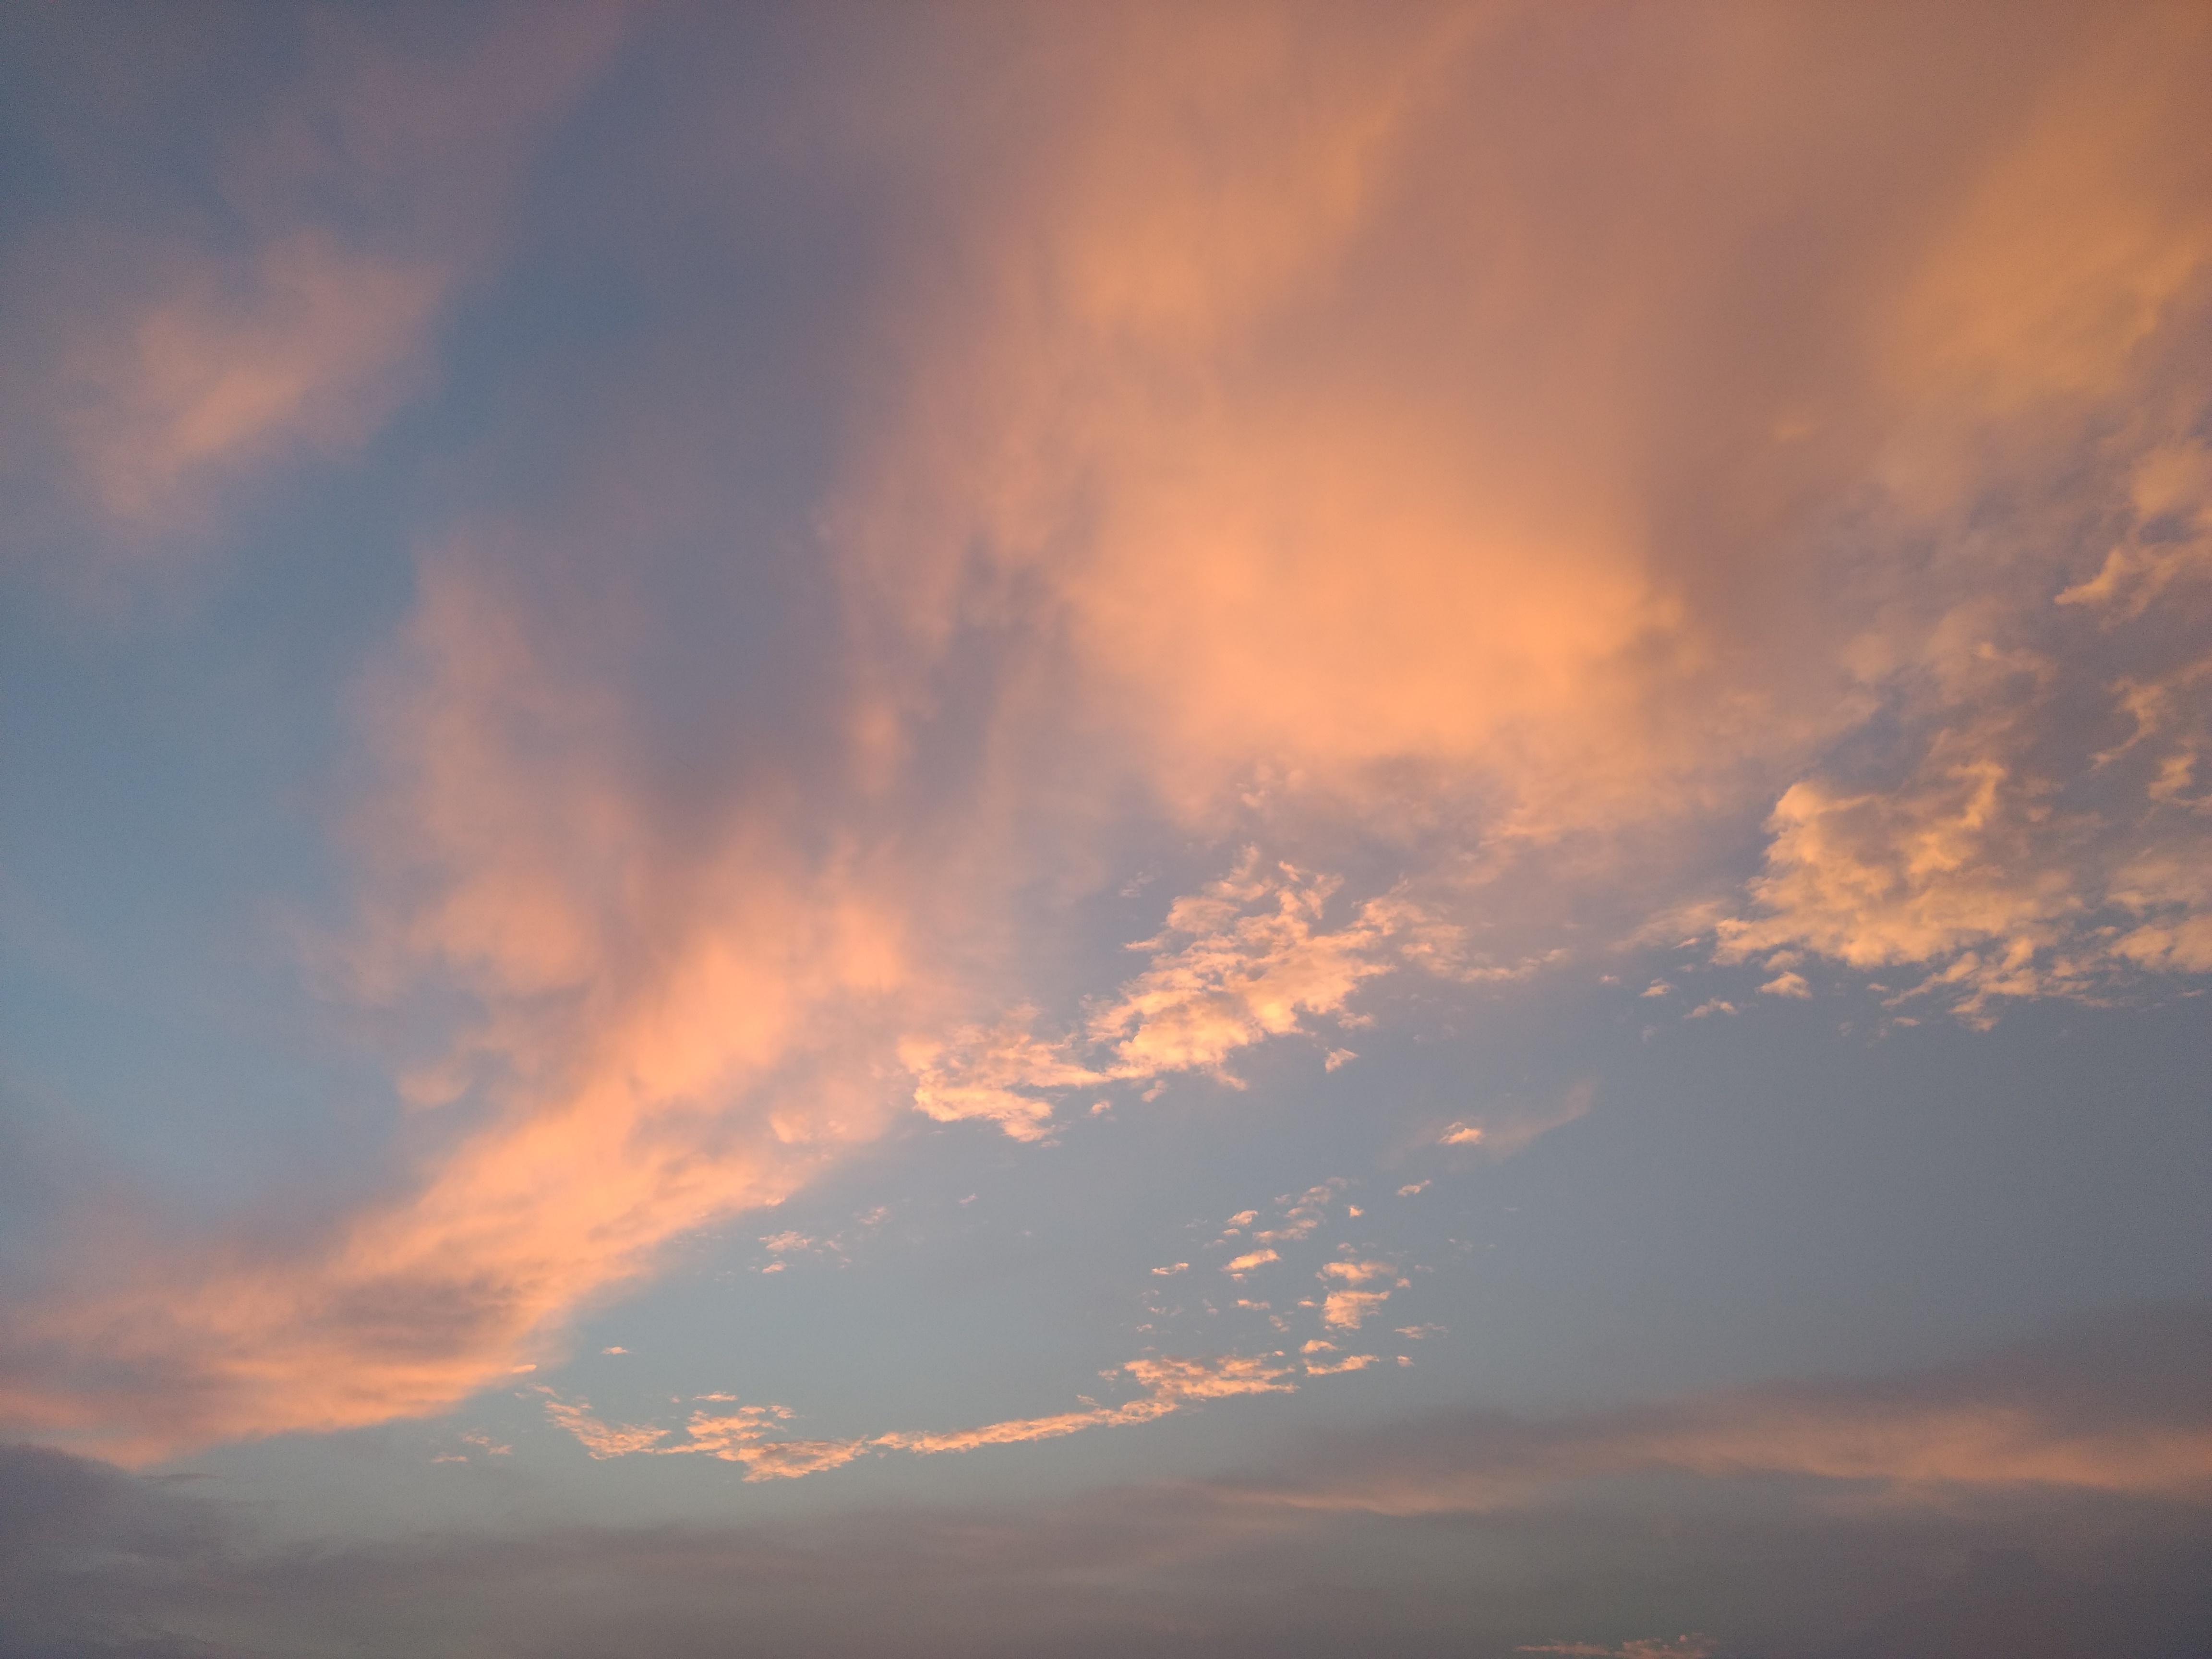 Clouds at sunset photo